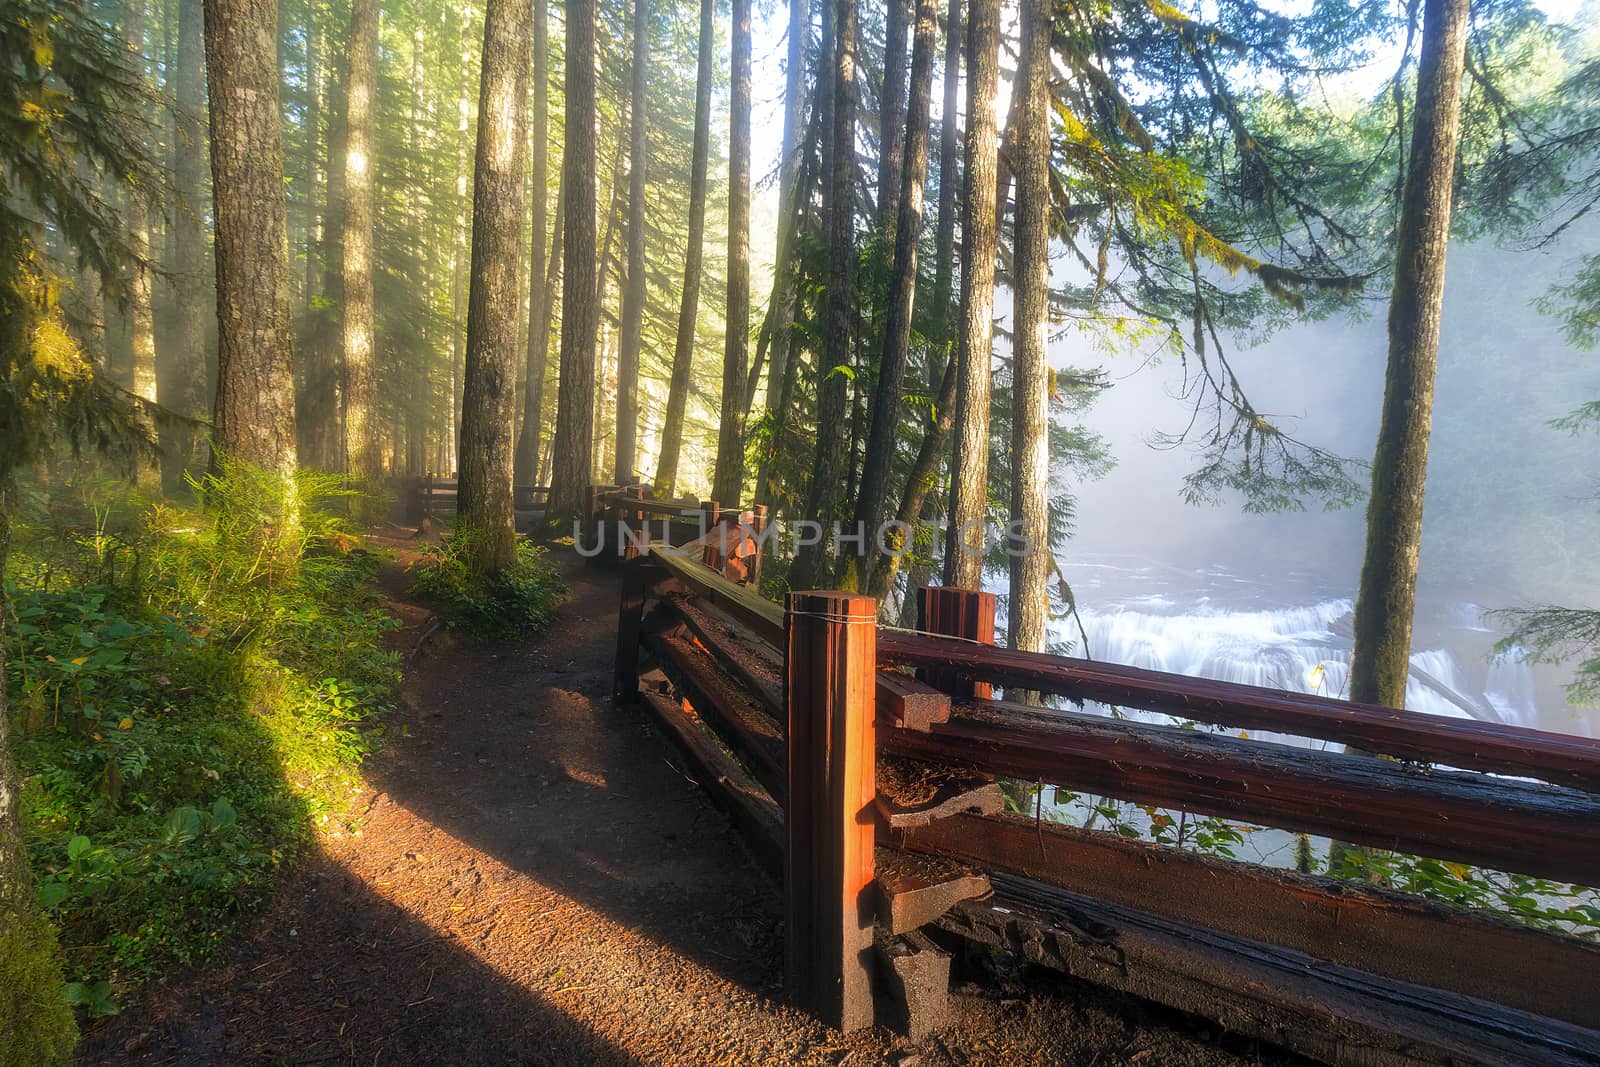 Hiking Trails at Lower Lewis River Trail by Davidgn